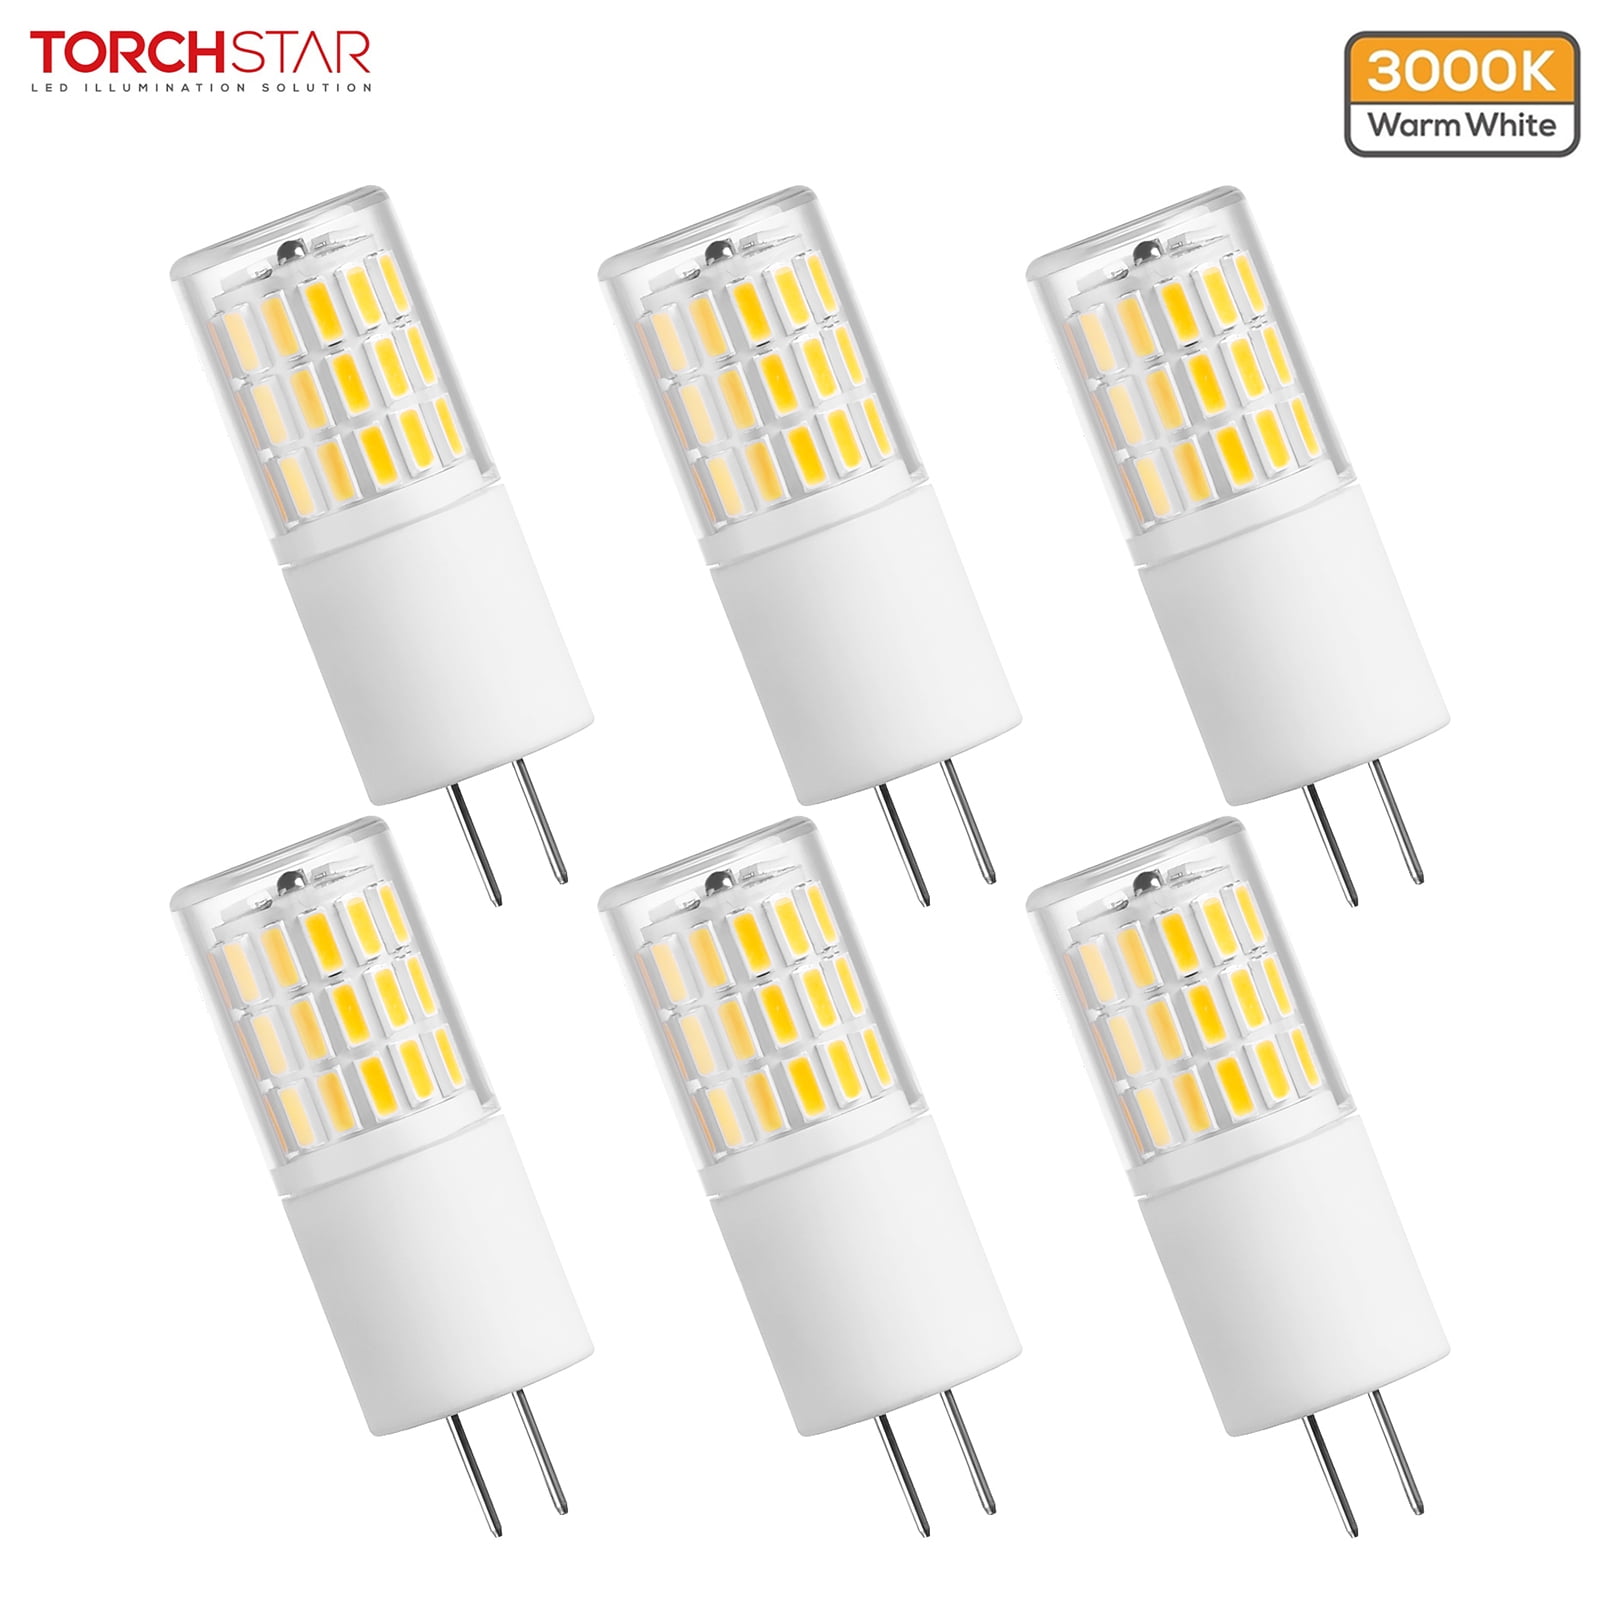 Not Dimmable,Cool White SYNL 6 Pieces of G4 LED Bulbs JC Dual-Needle Lamp Holder Bulbs 3W AC DC 12V 20W-30W T3 Halogen Rail Bulb Replacement Landscape Bulb 